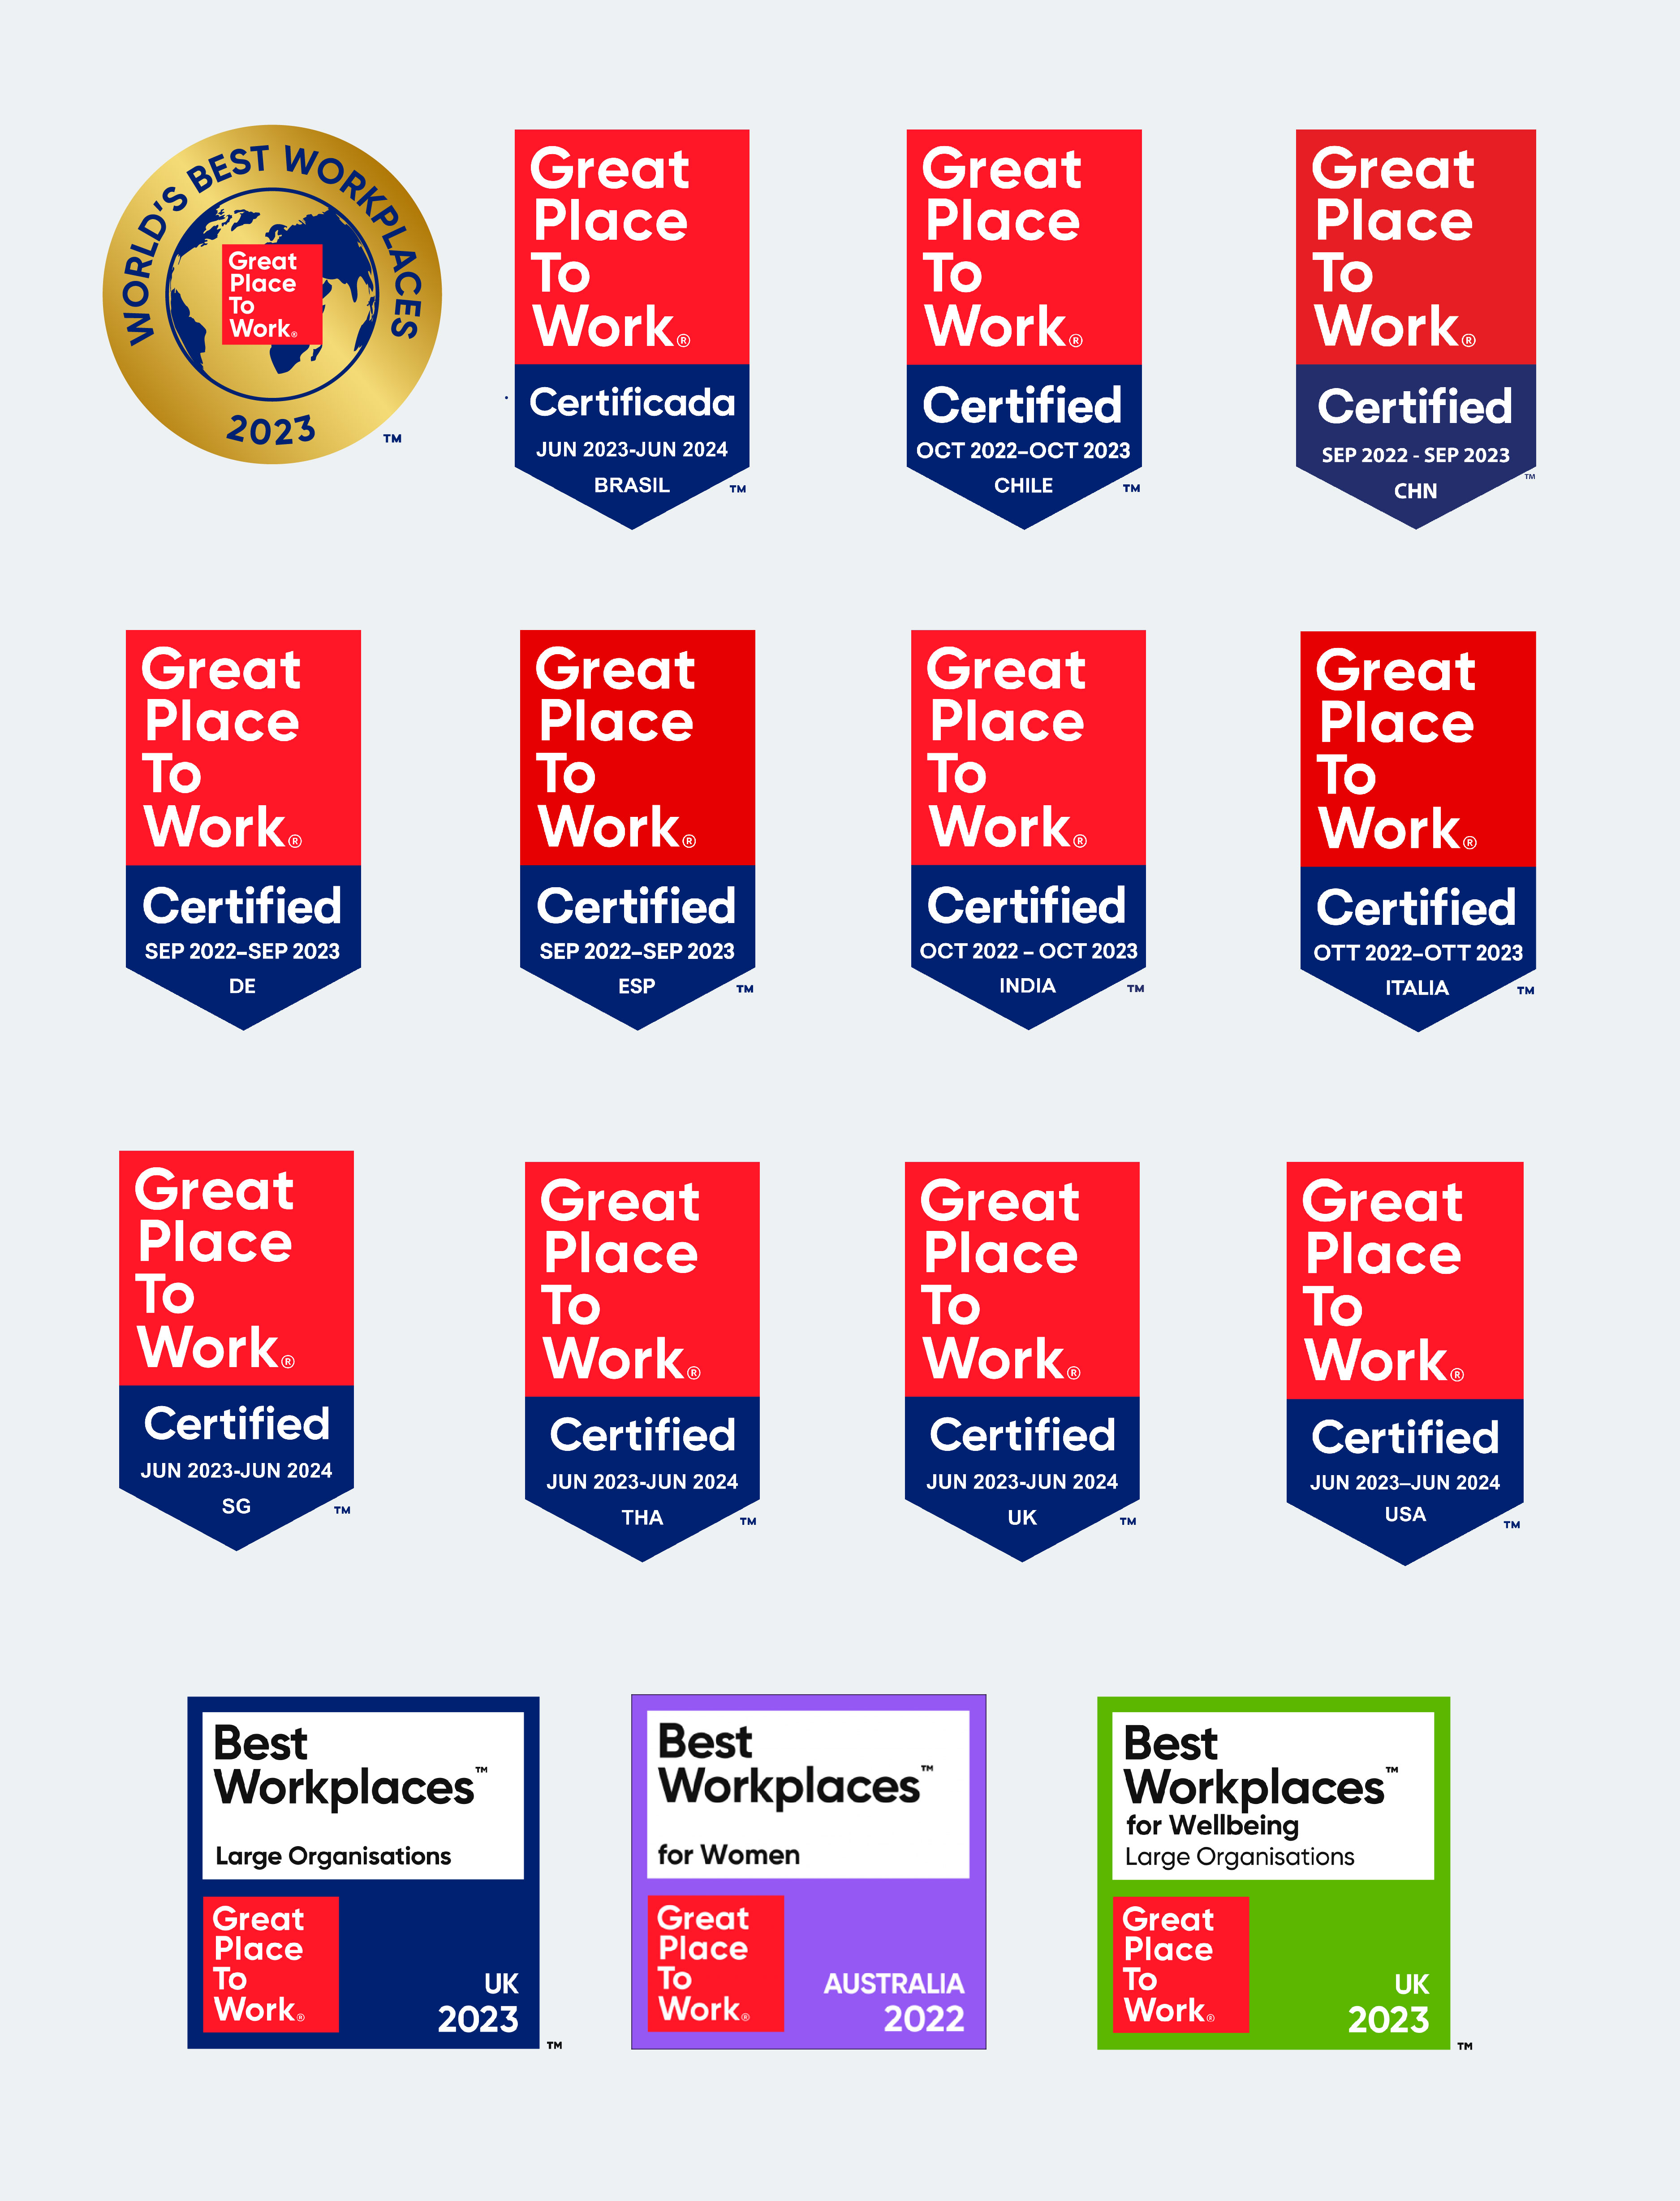 A variety of logos showing that Thoughtworks has been certified as a Great Place to Work in a number of regions across the globe